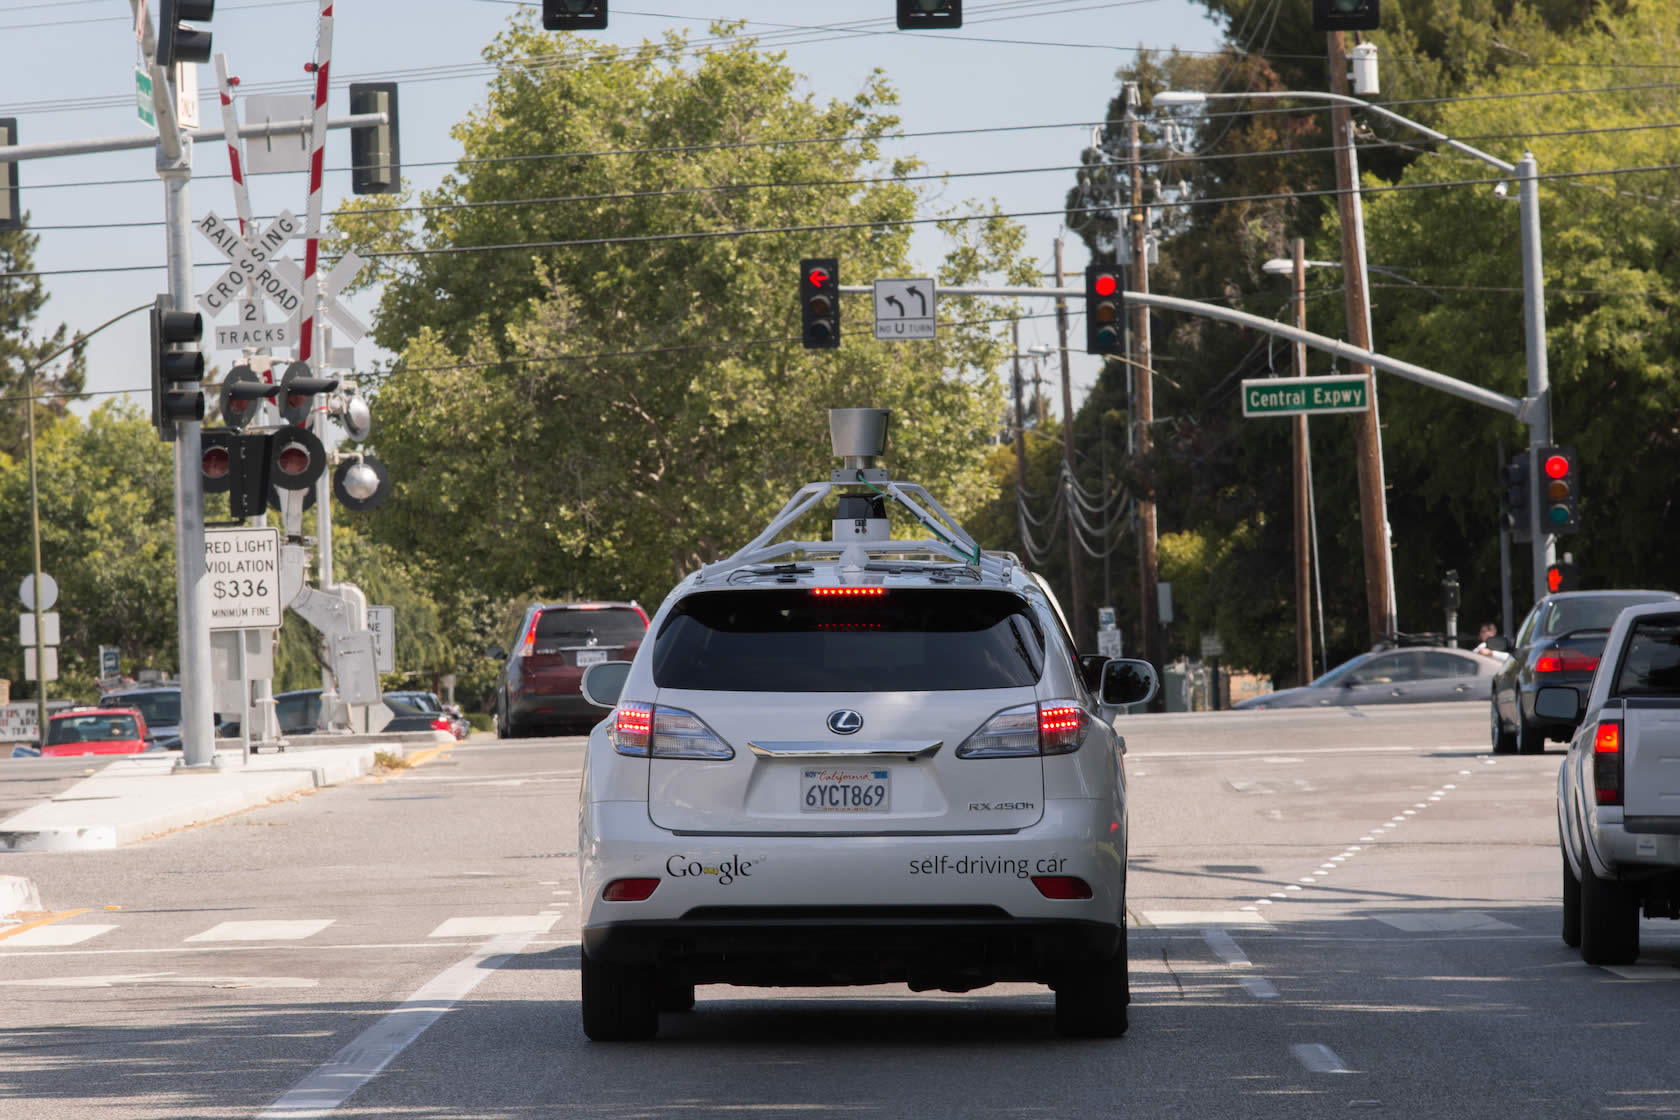 Google to Congress: Go Easy, Hurry Up on Self-Driving Car Regulations
